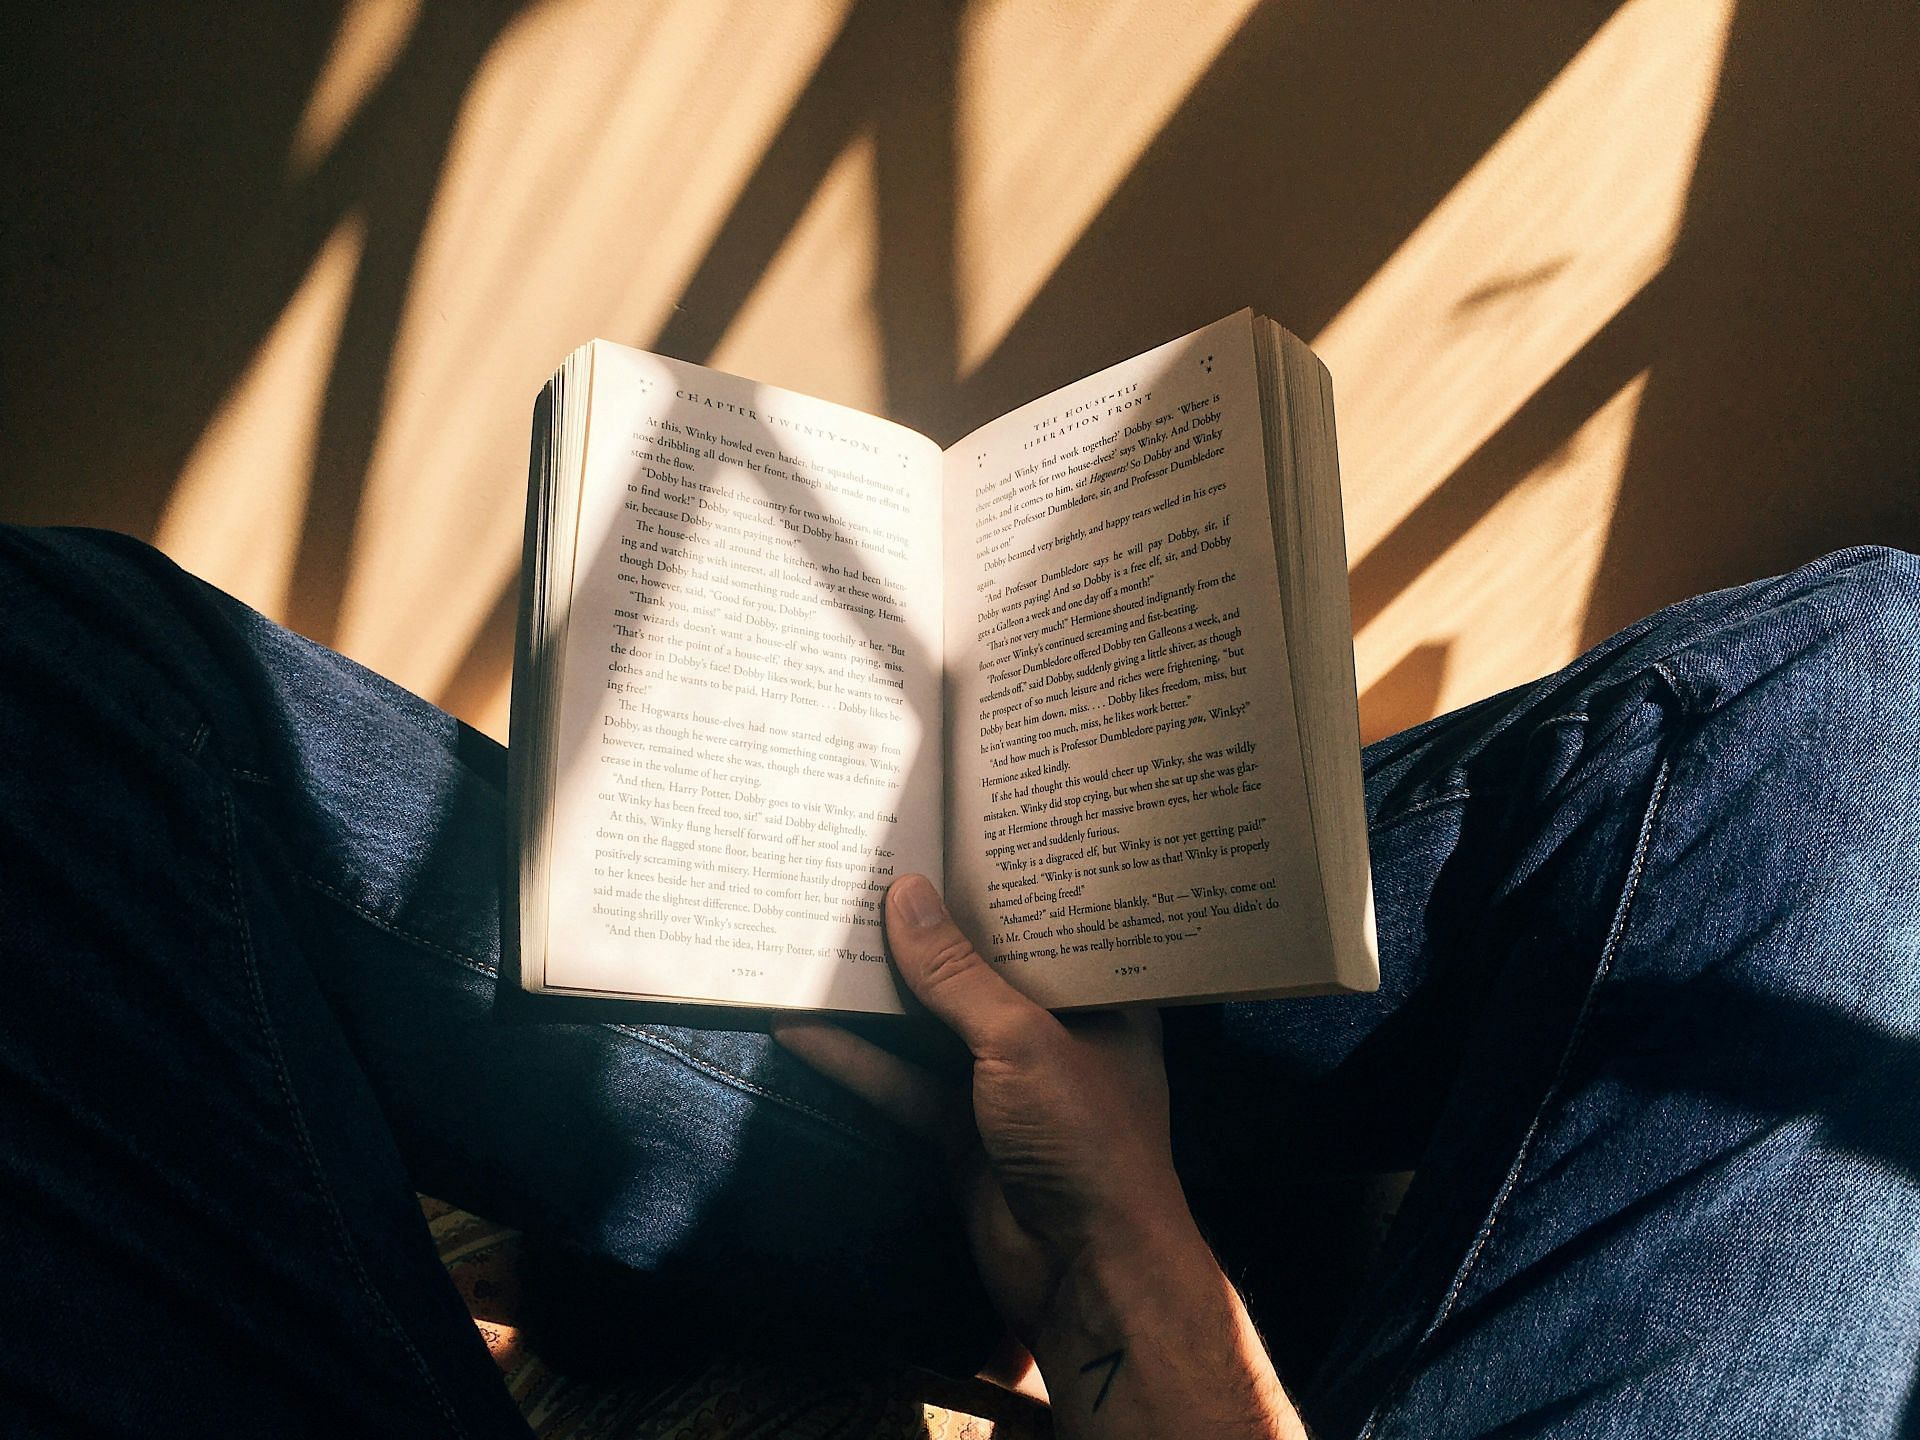 Gambling addiction treatment: Keep yourself busy by reading a book or just hearing some music (Image by Blaz Photo/Unsplash)